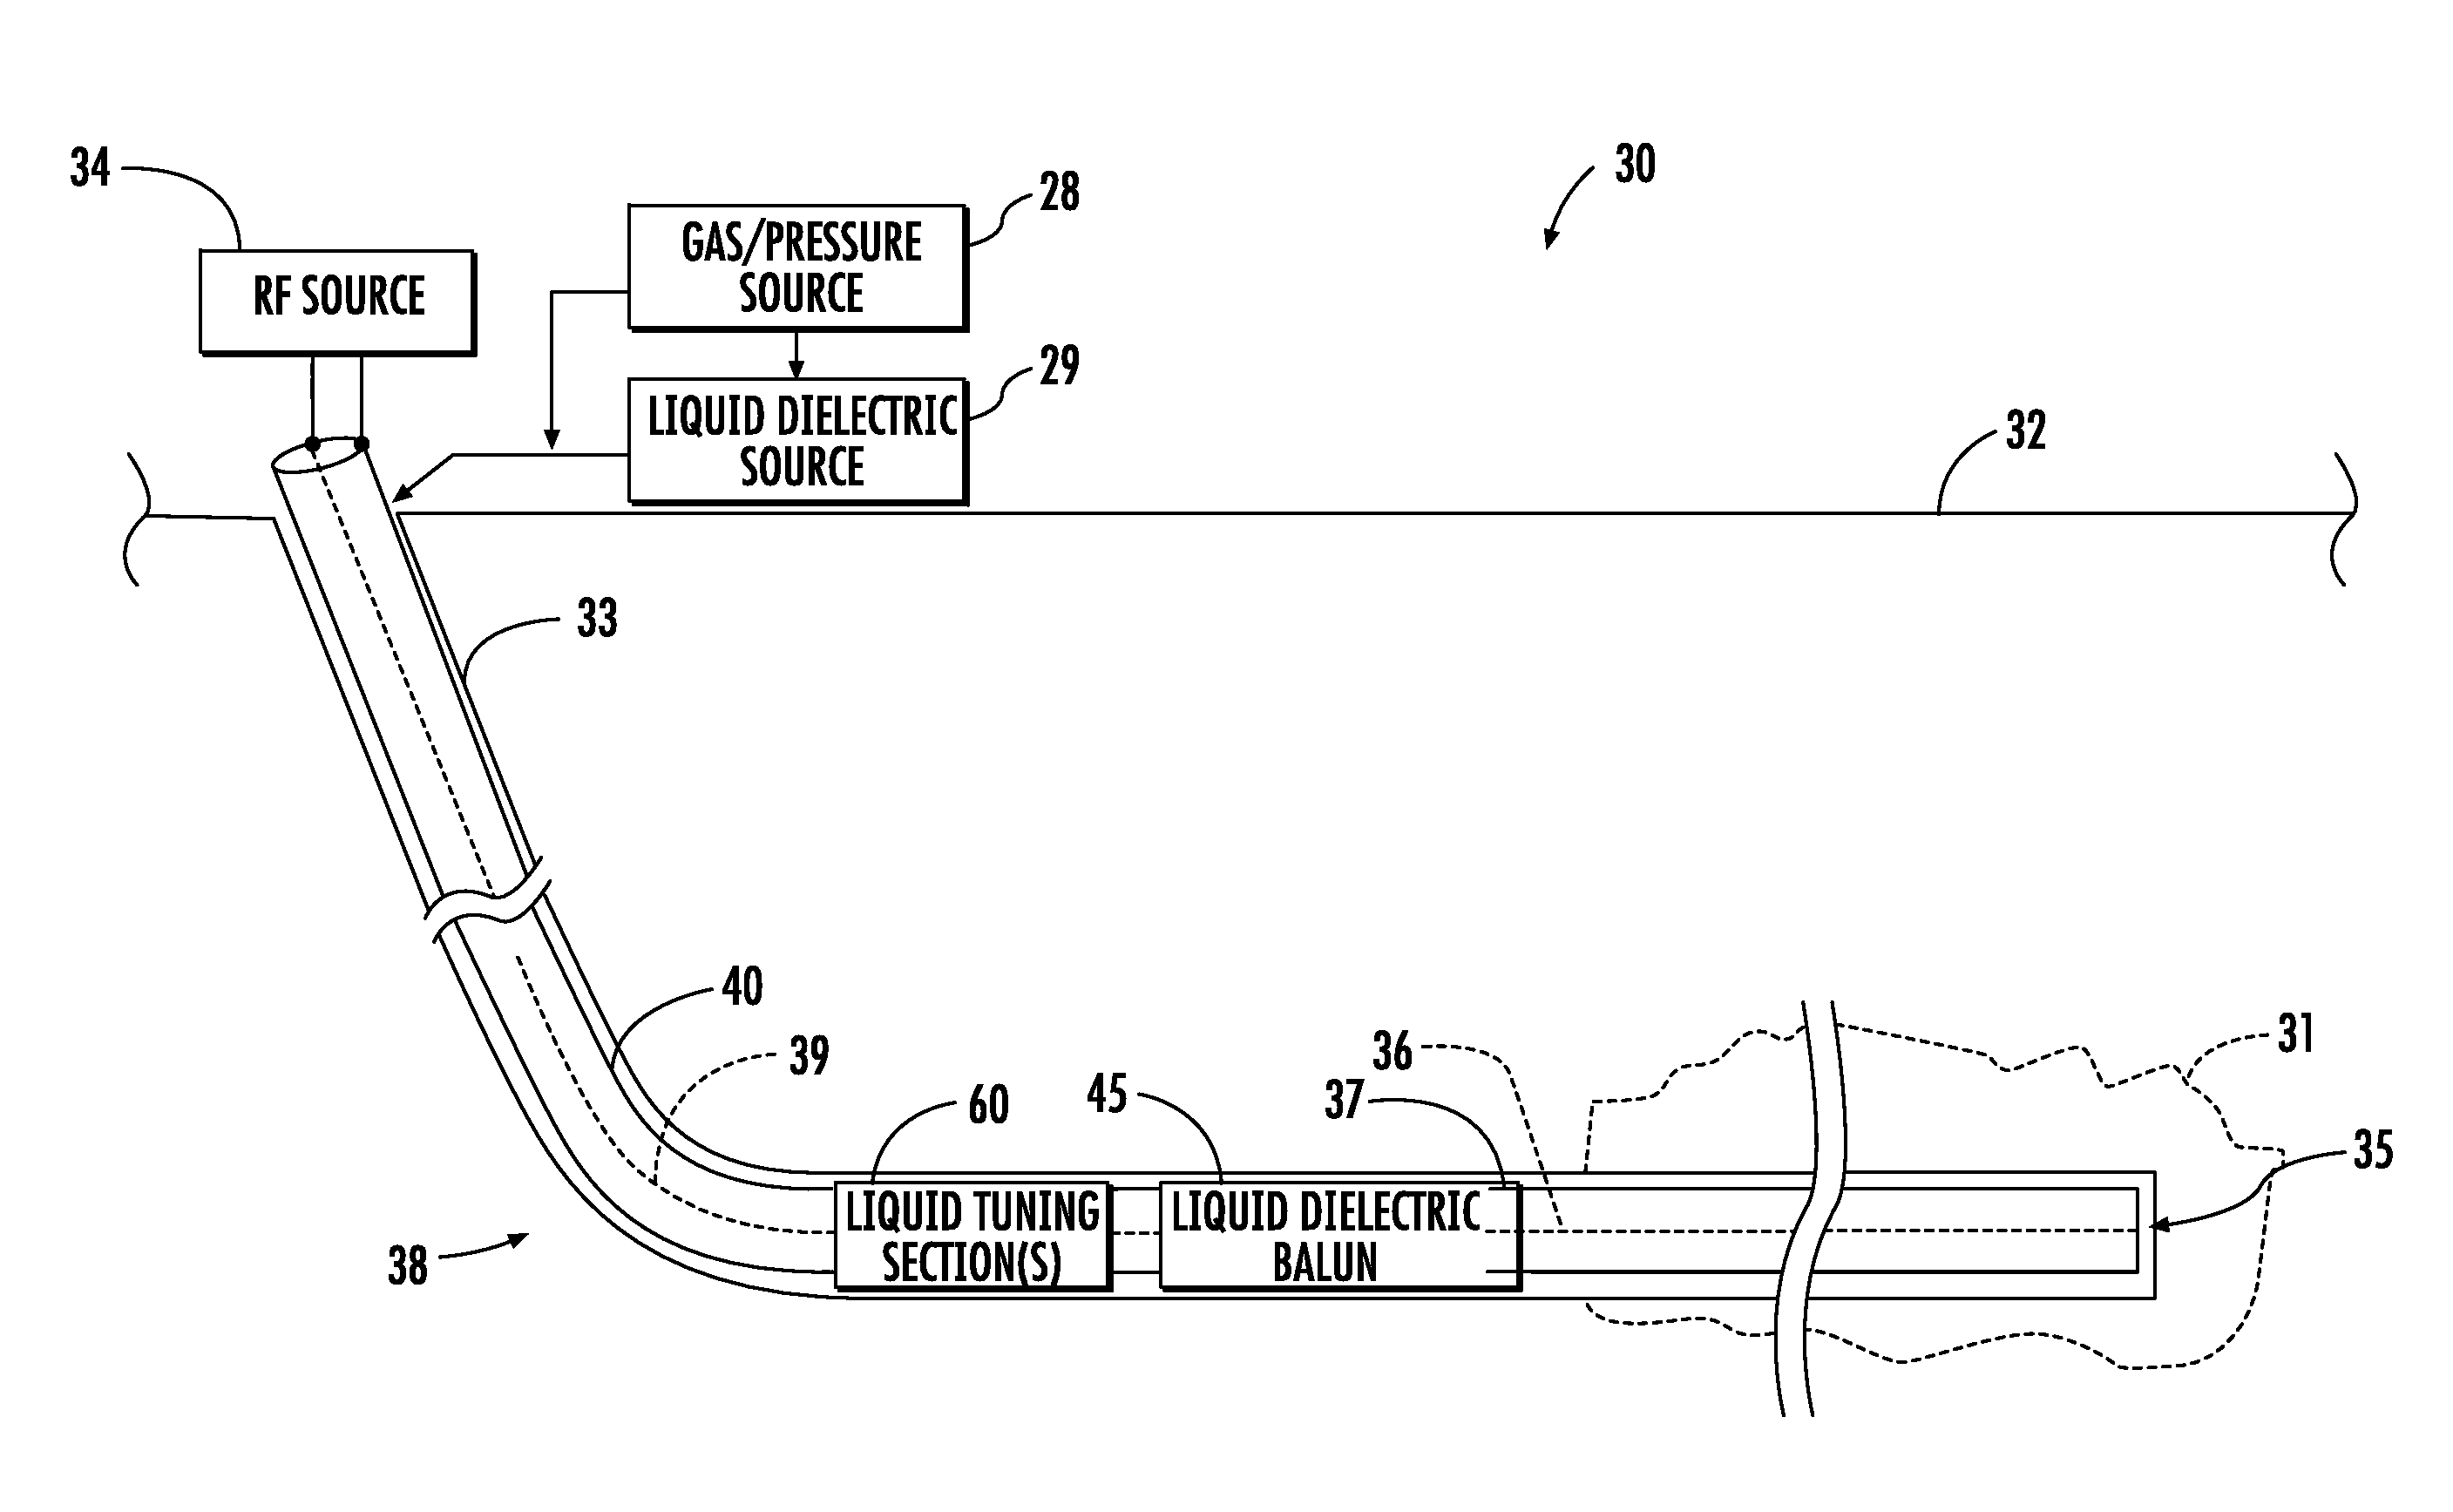 Apparatus for heating a hydrocarbon resource in a subterranean formation including a fluid balun and related methods